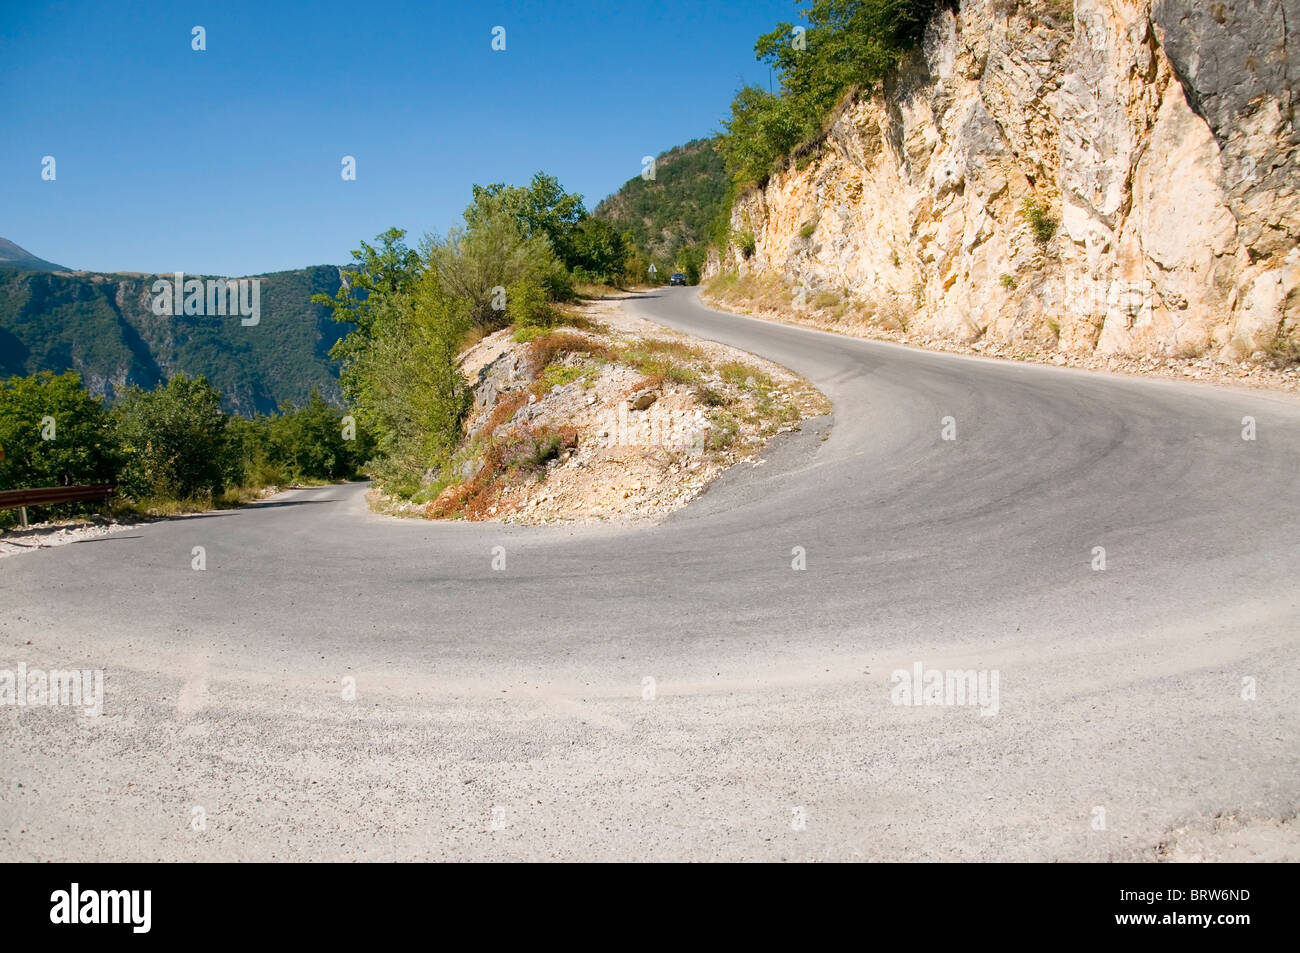 Sharp road curve in high mountains Stock Photo